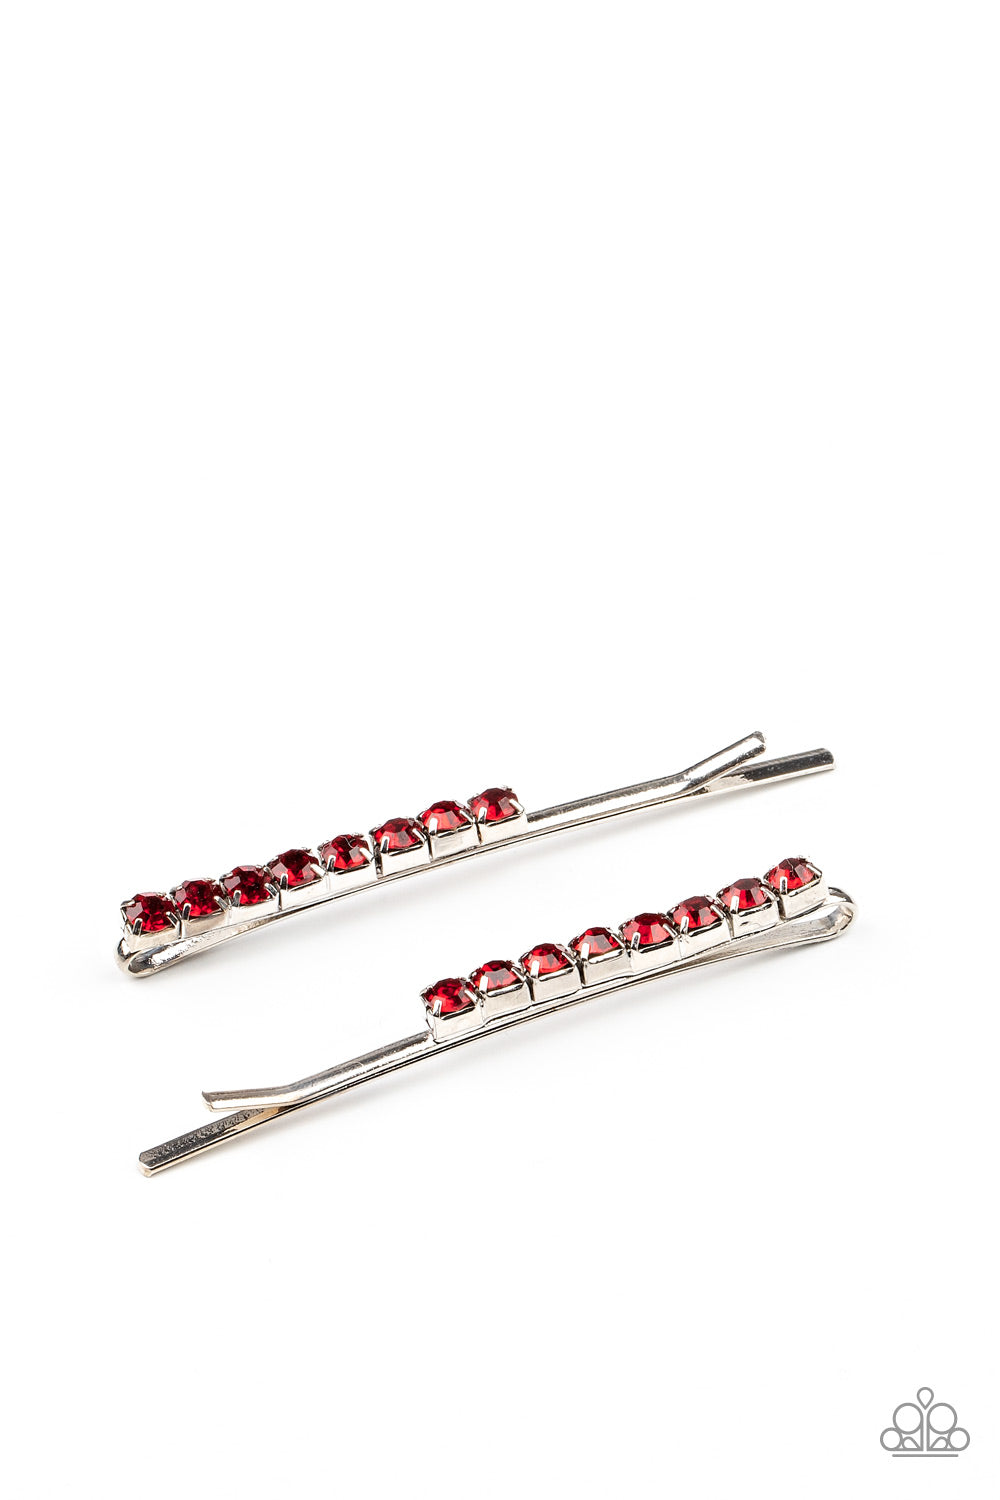 Satisfactory Sparkle - Red Hair Clip - Paparazzi Accessories